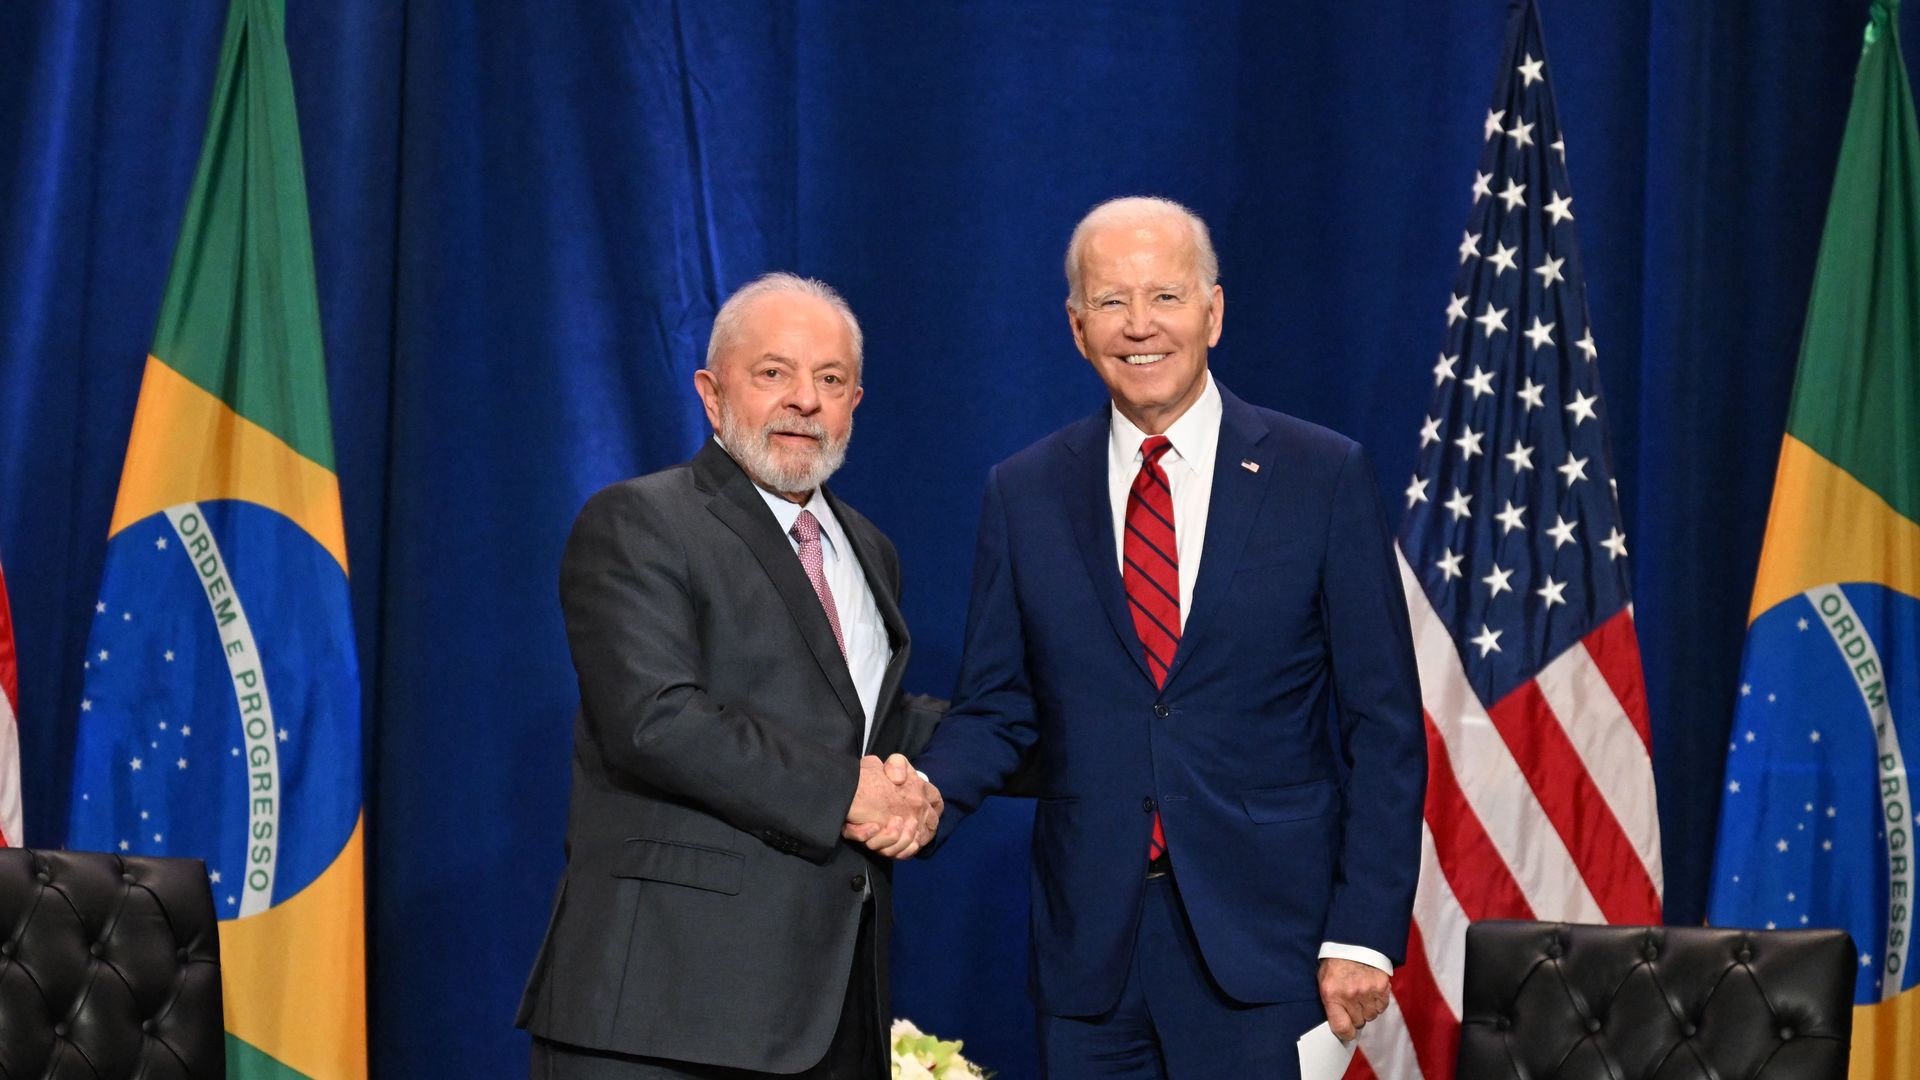 Brazil president Lula stands to the left of President Joe Biden, shaking hands. the Brazil and American flags are behind them as they stand in front of a blue wall